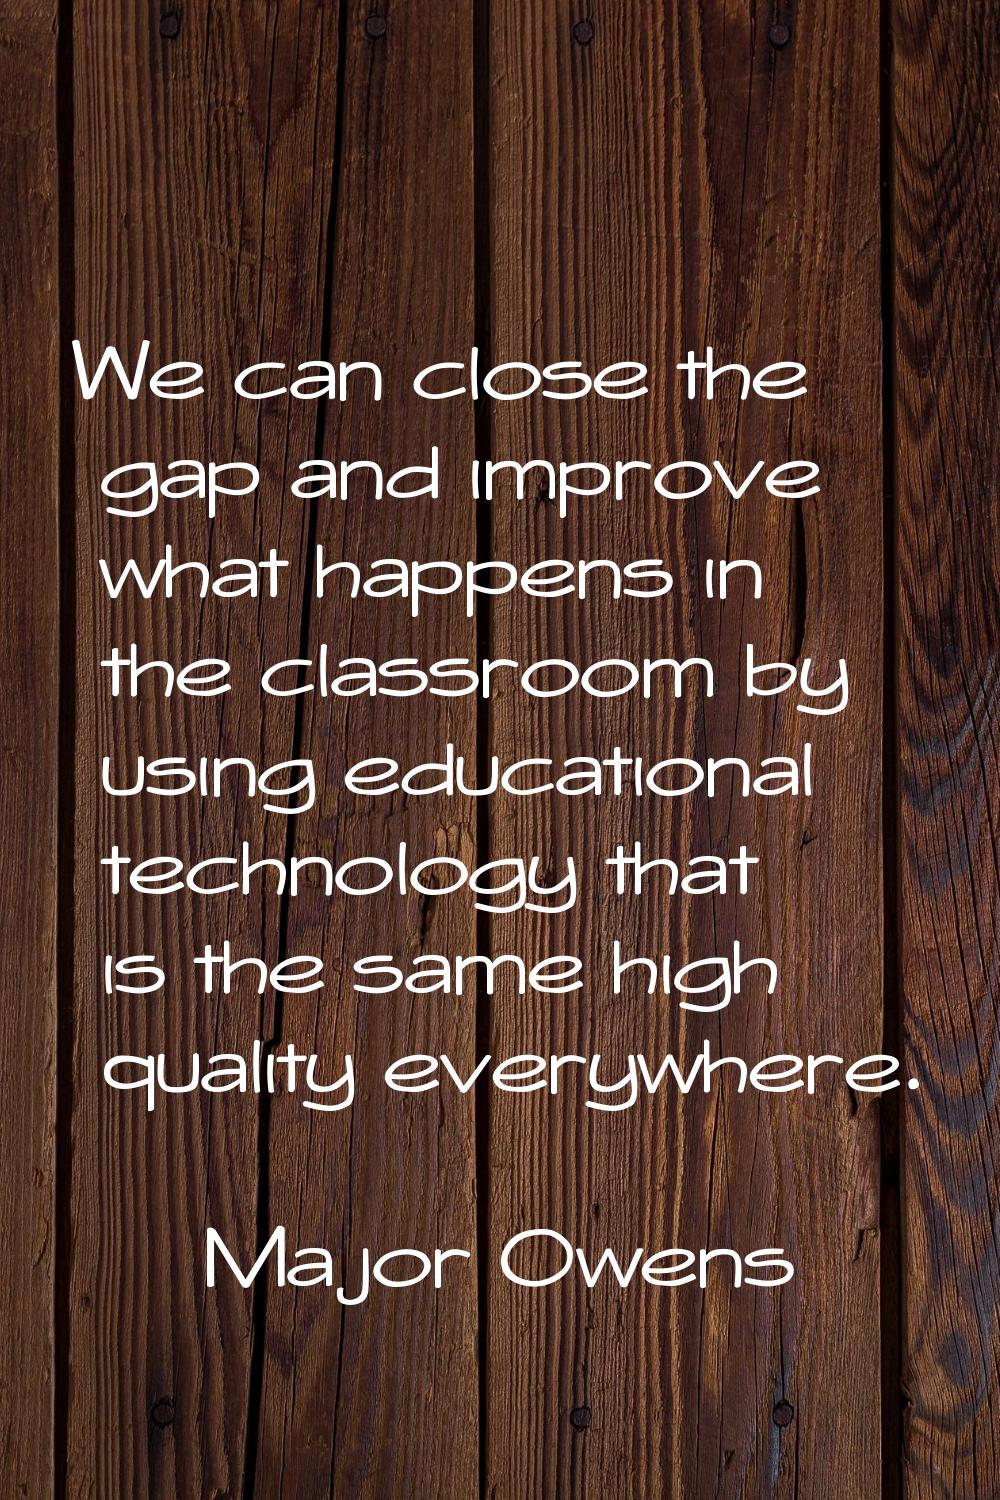 We can close the gap and improve what happens in the classroom by using educational technology that